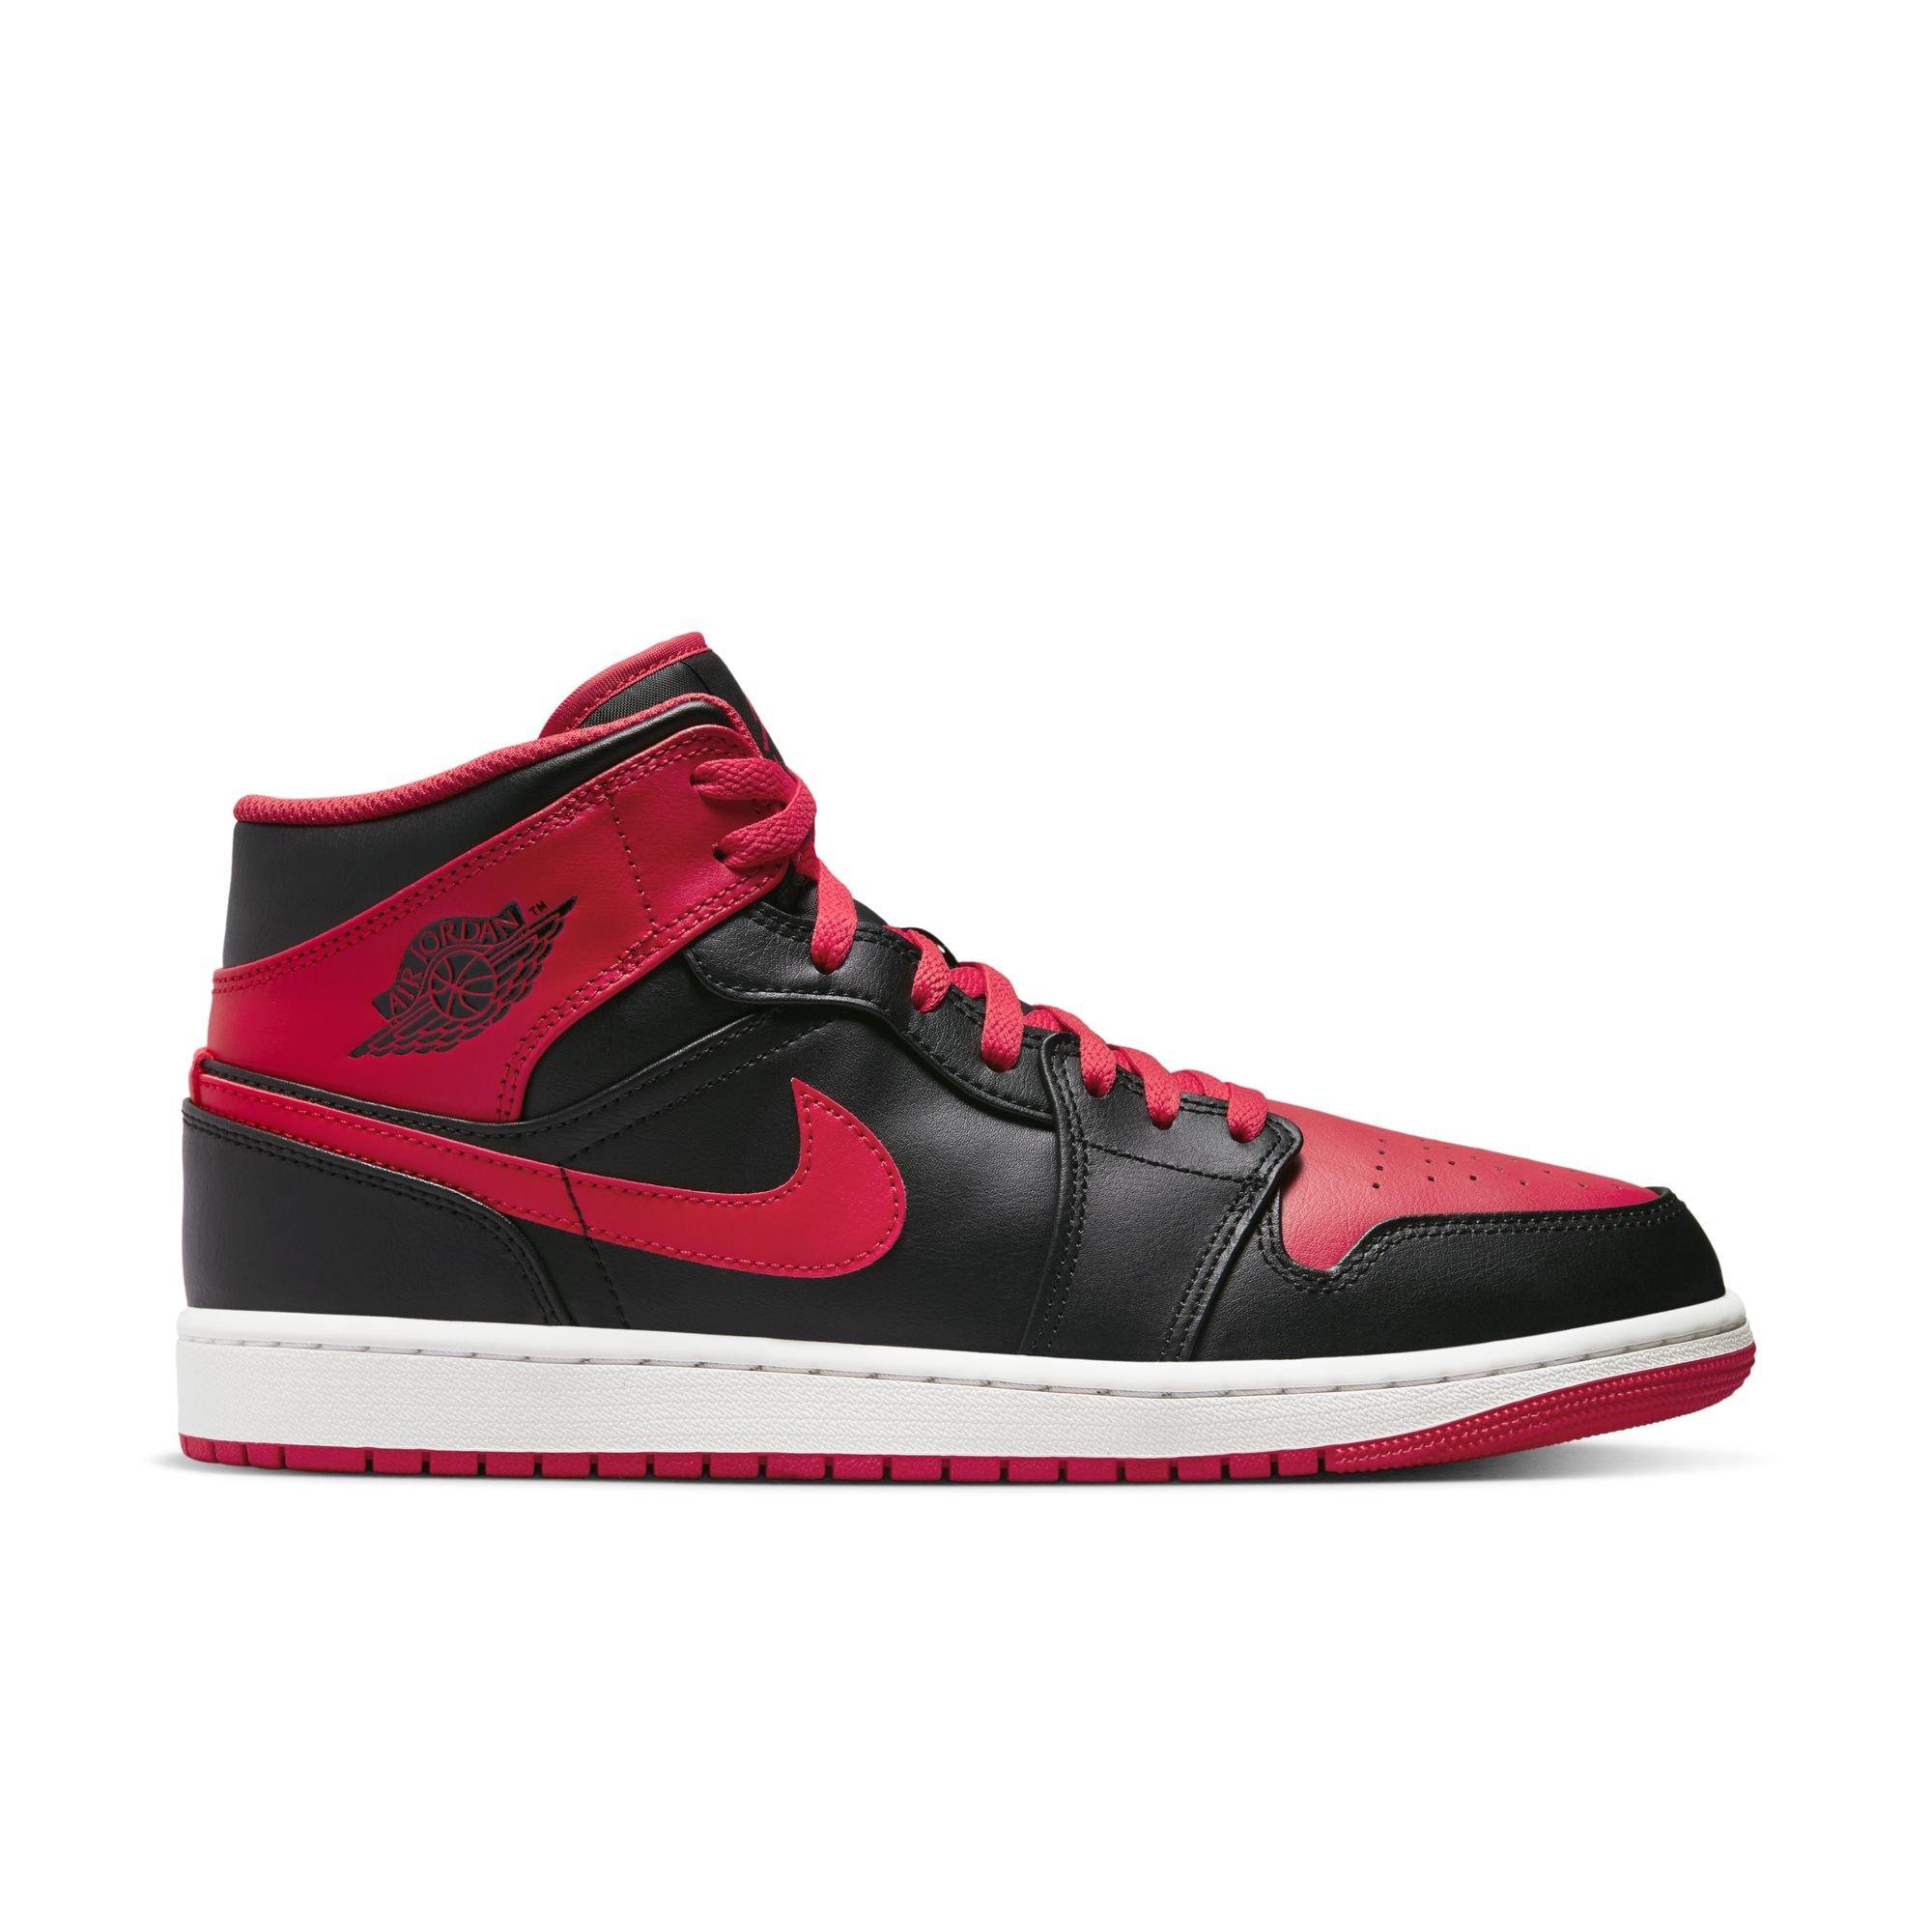 black and red jordans cheap